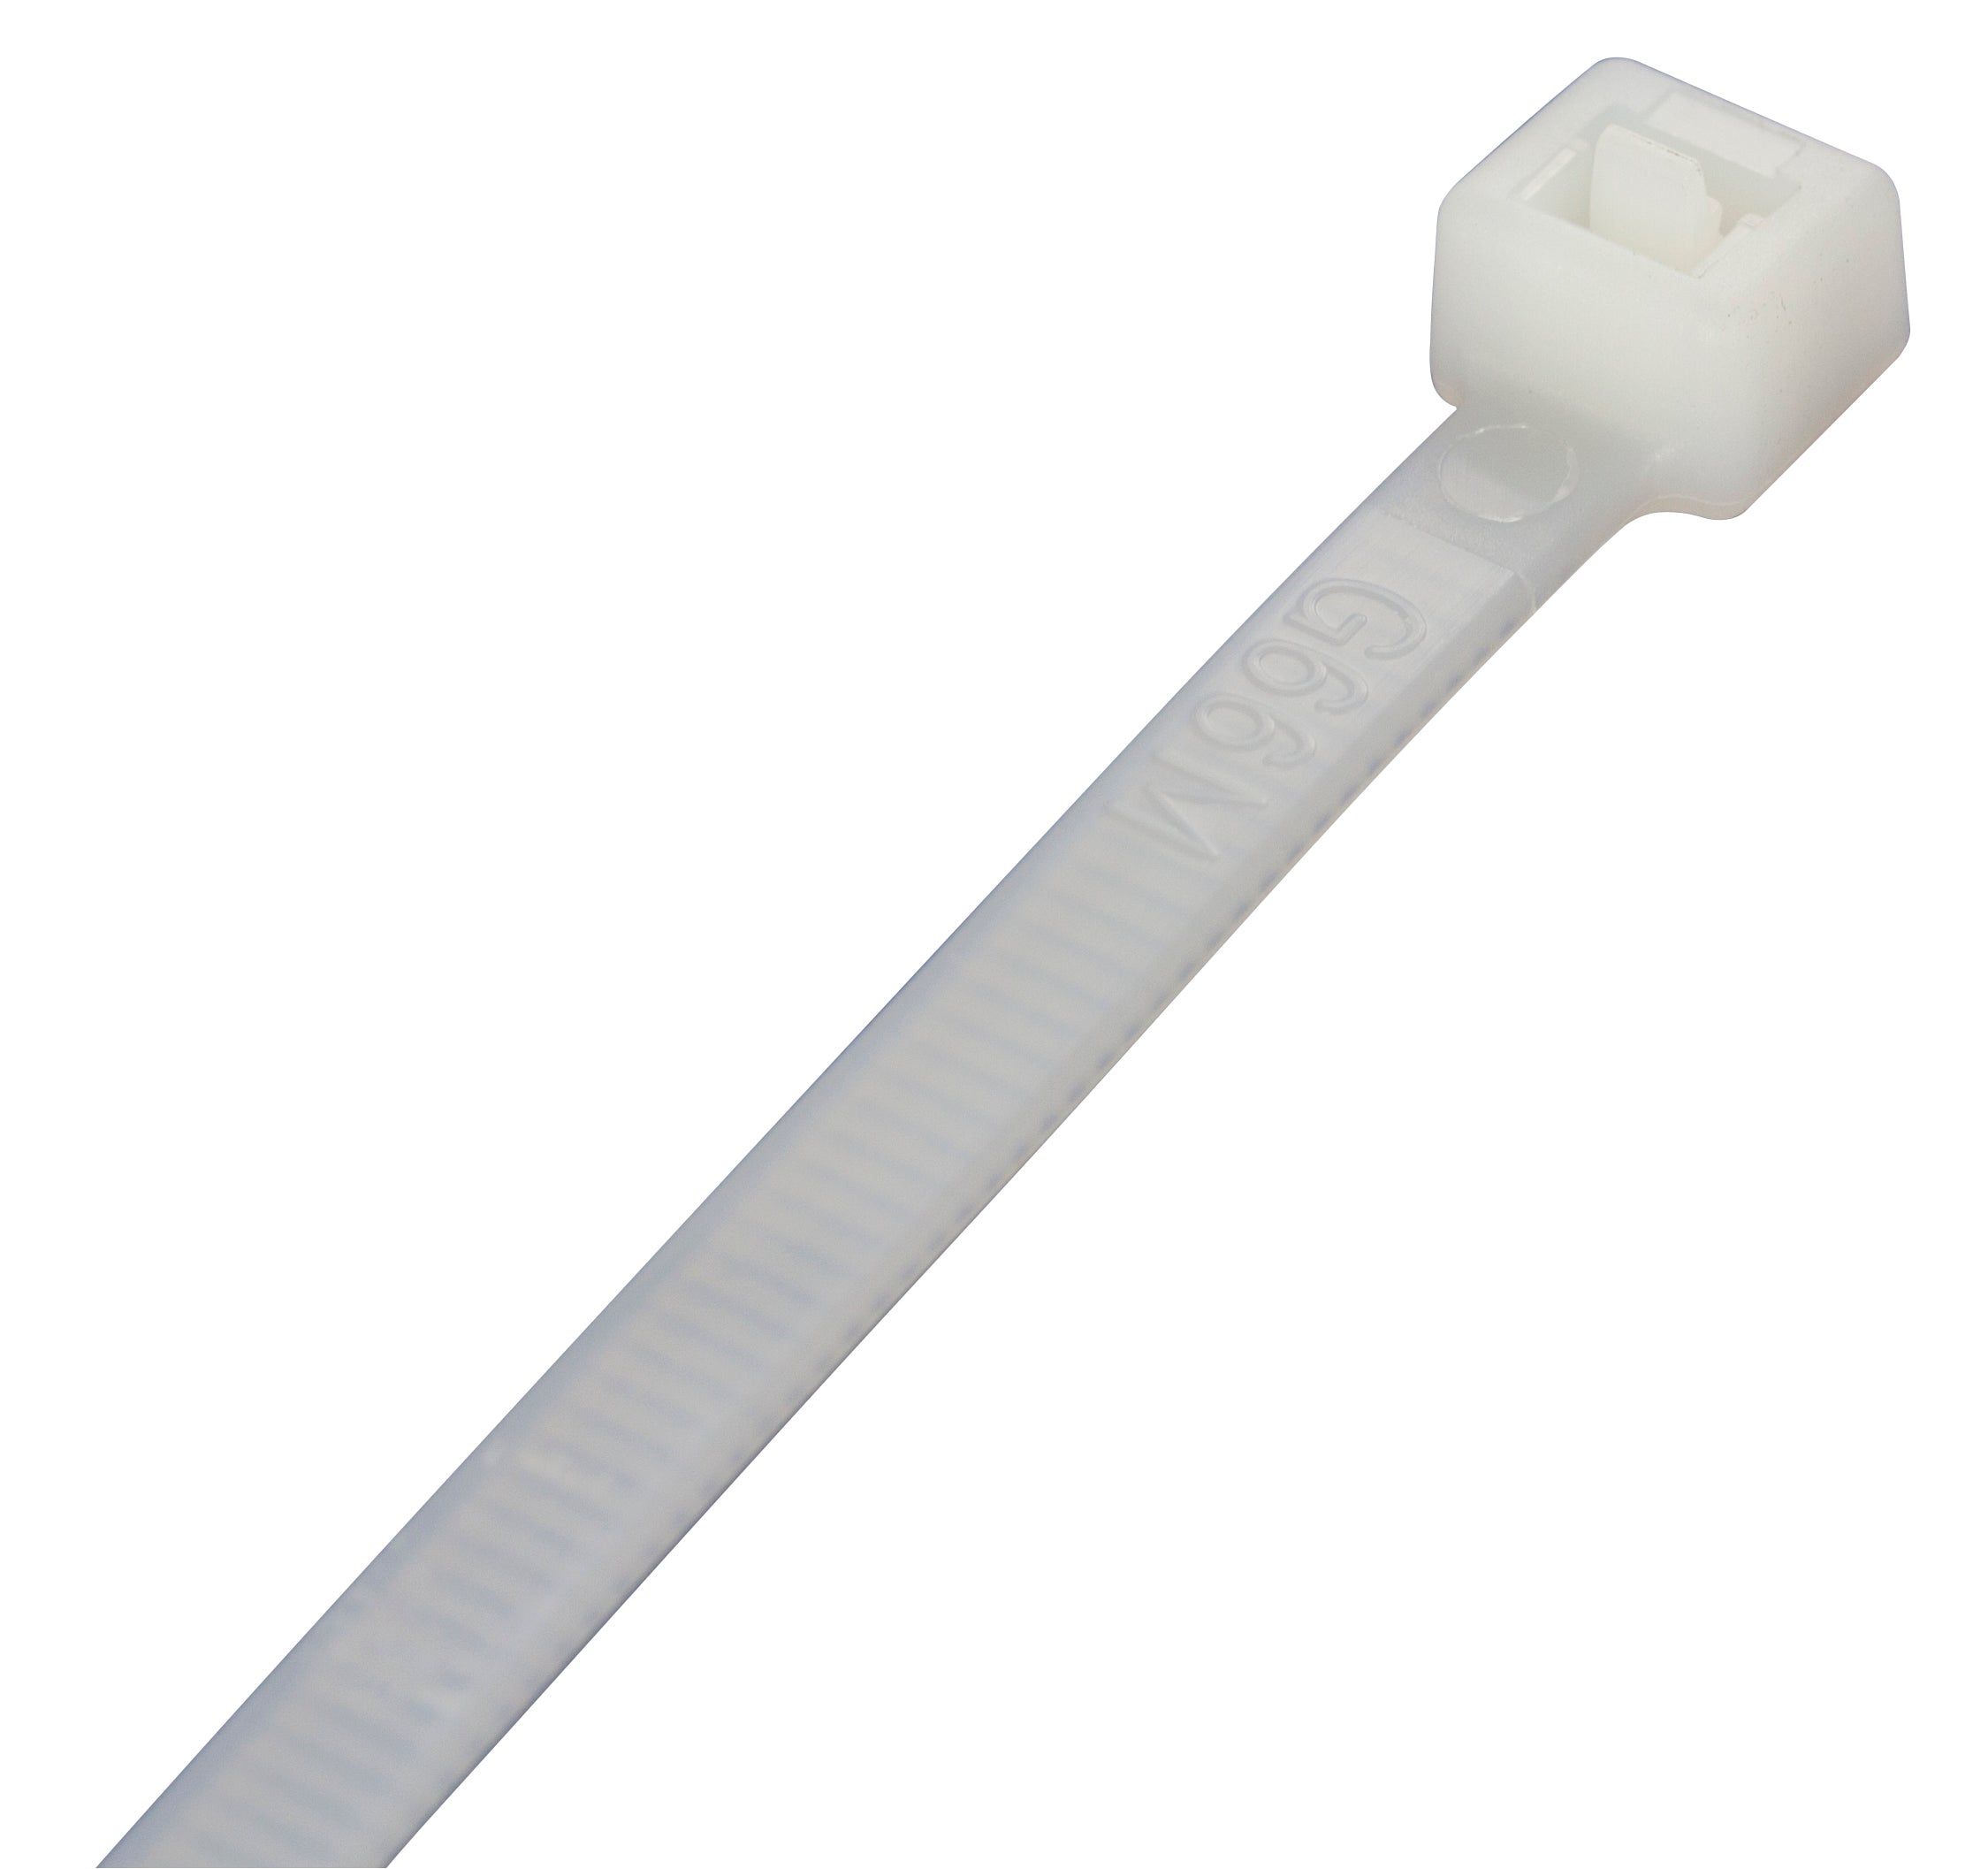 Premium Natural Cable Ties 450mm x 7.6mm - Pack of 100